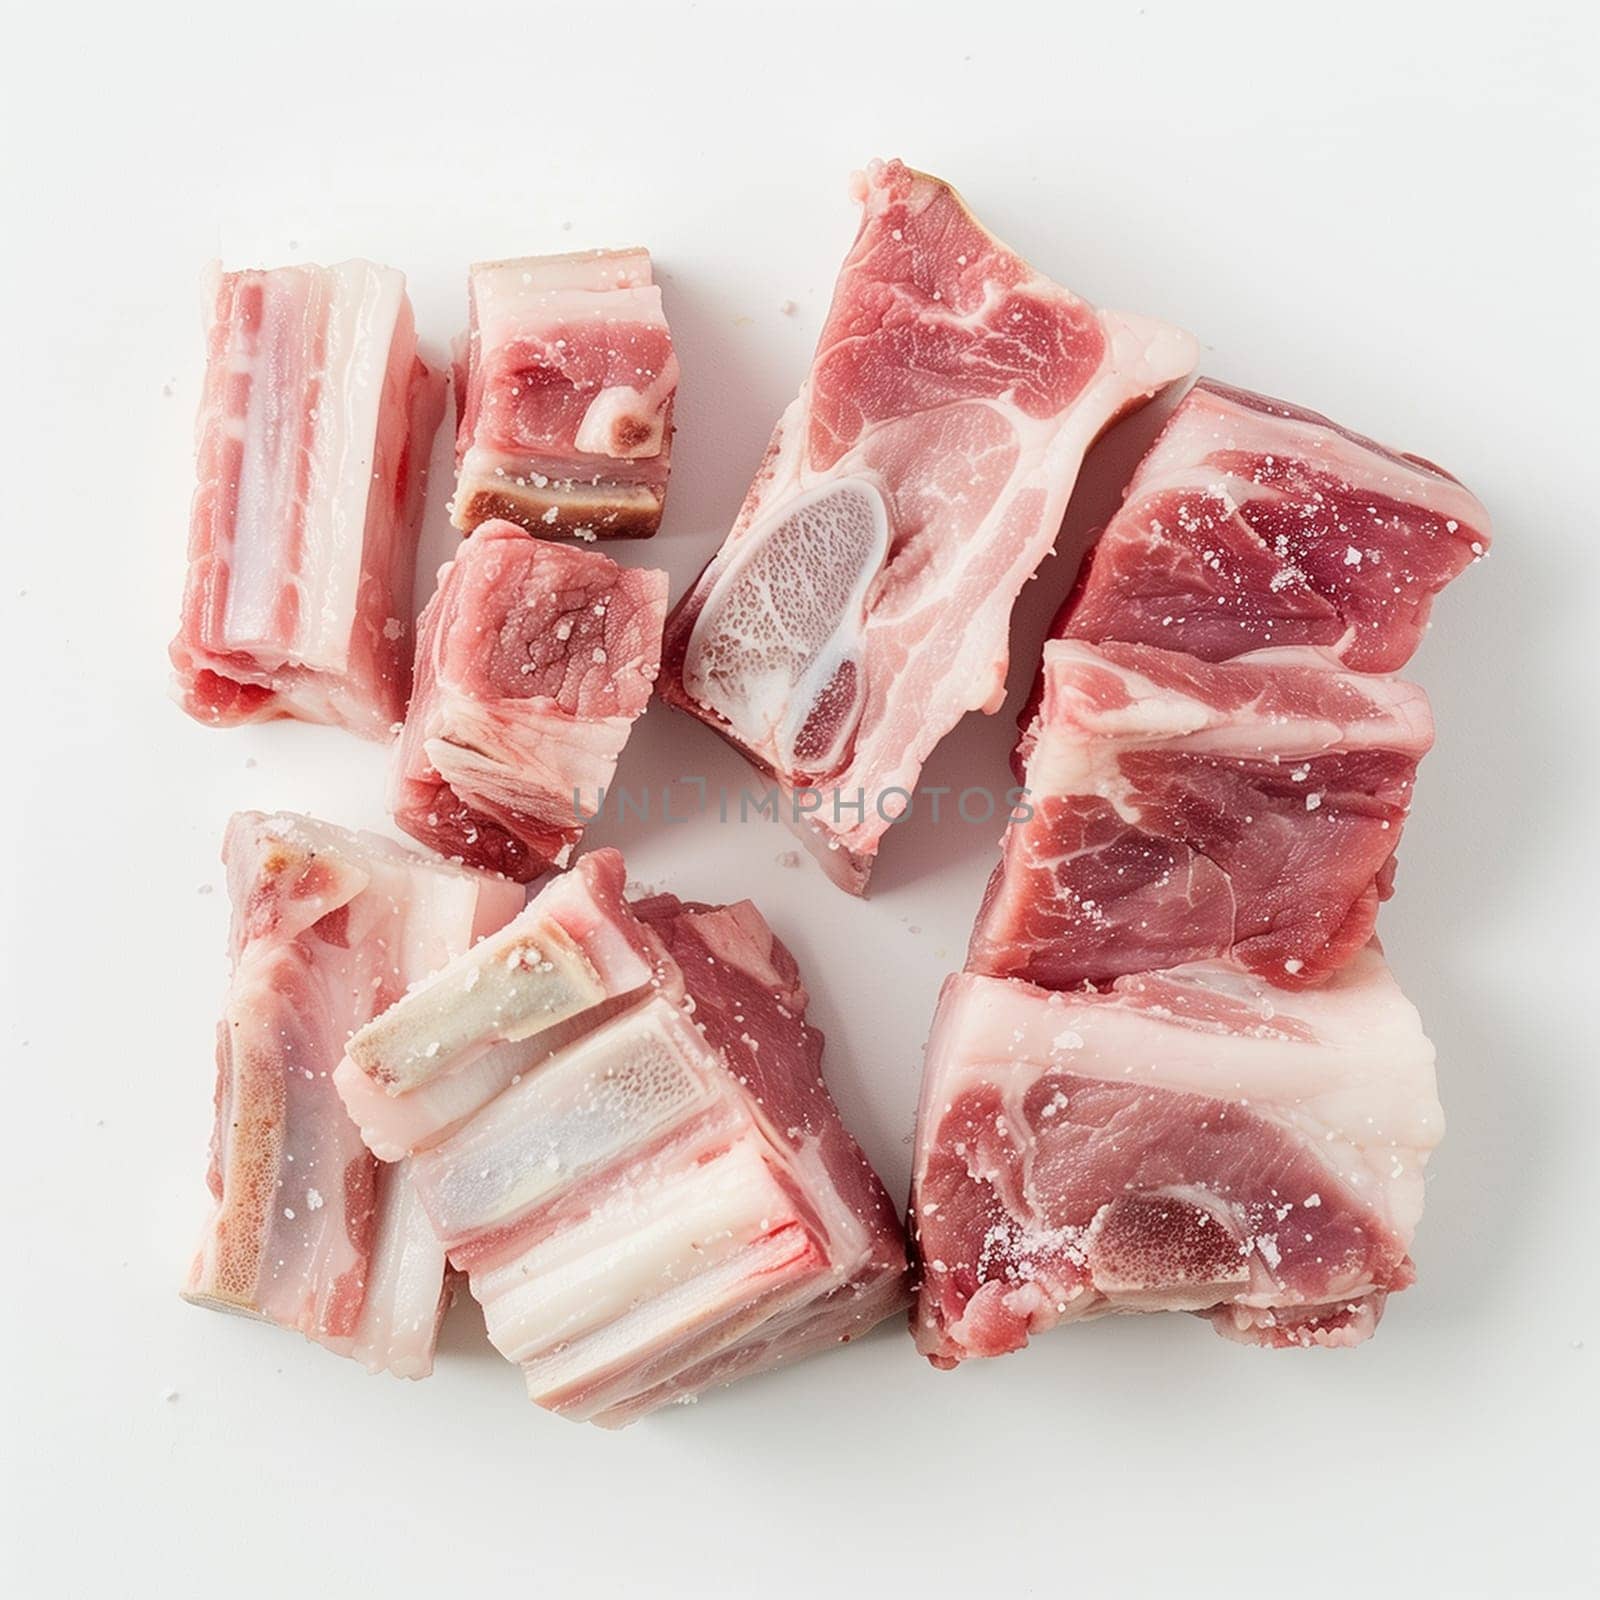 A mound of uncooked meat rests on a pristine white countertop, showcasing a variety of cuts and textures.